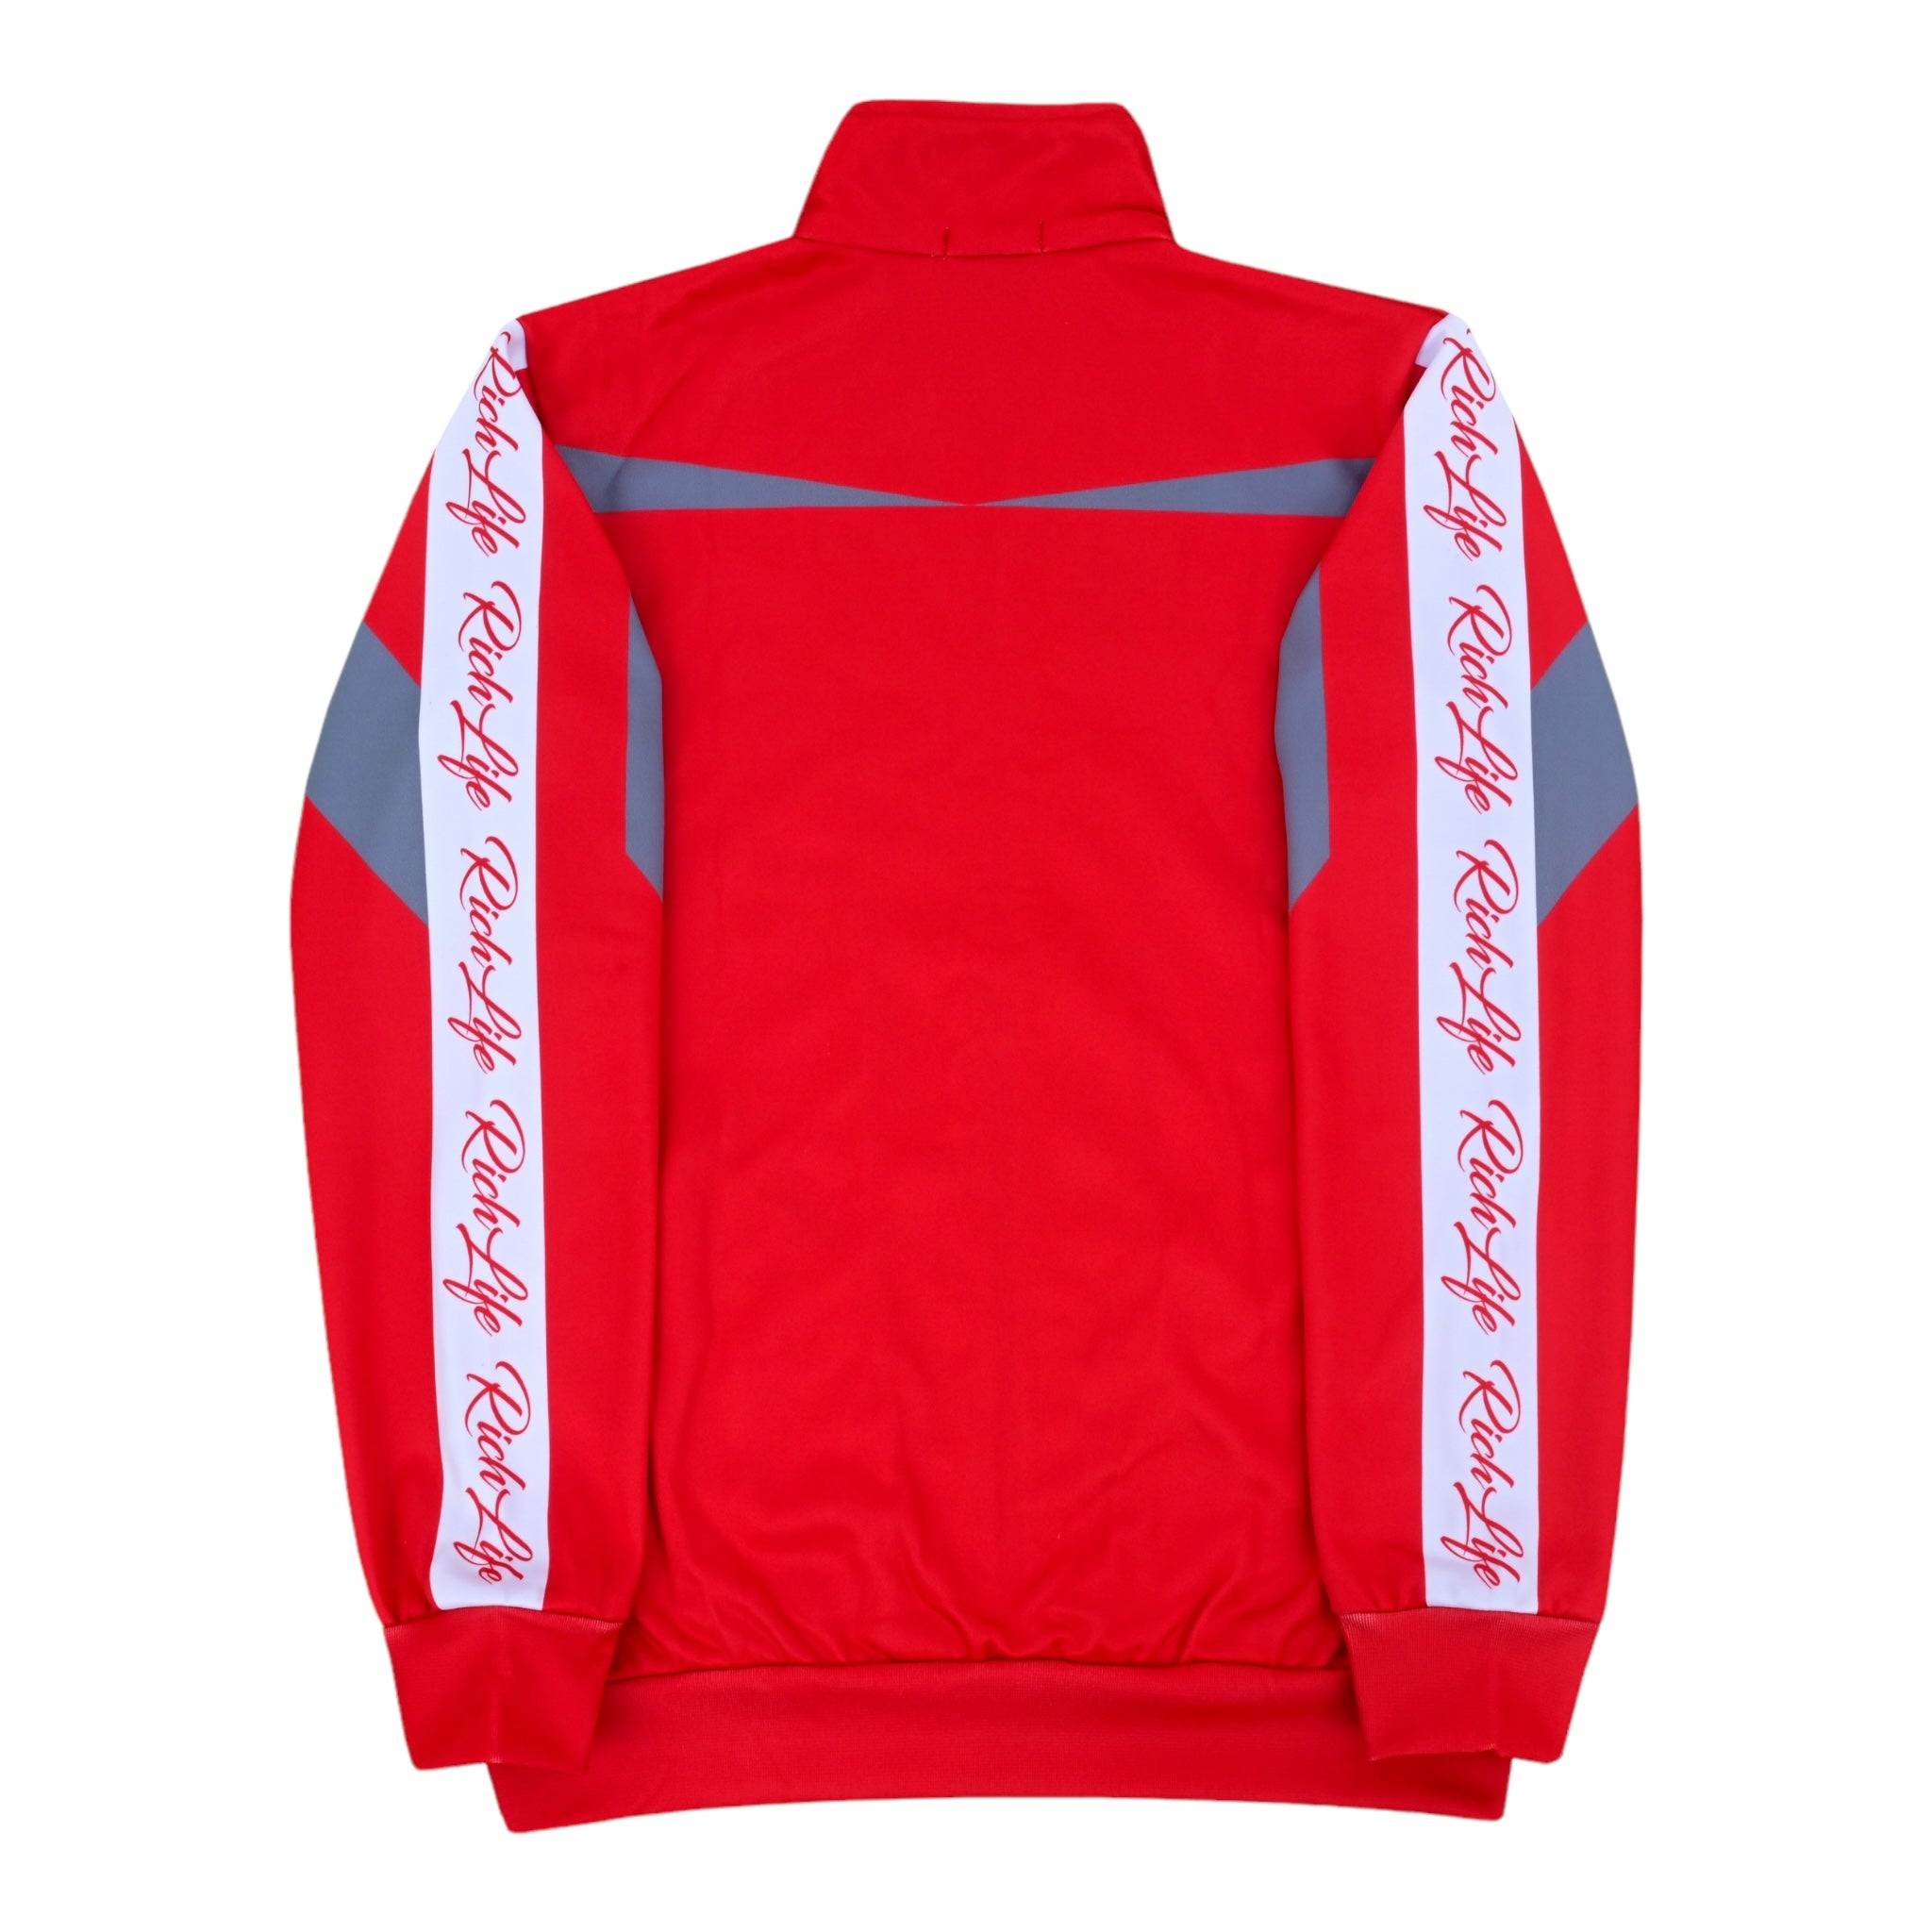 Rich Life "Courtney" Ladies Tracksuit